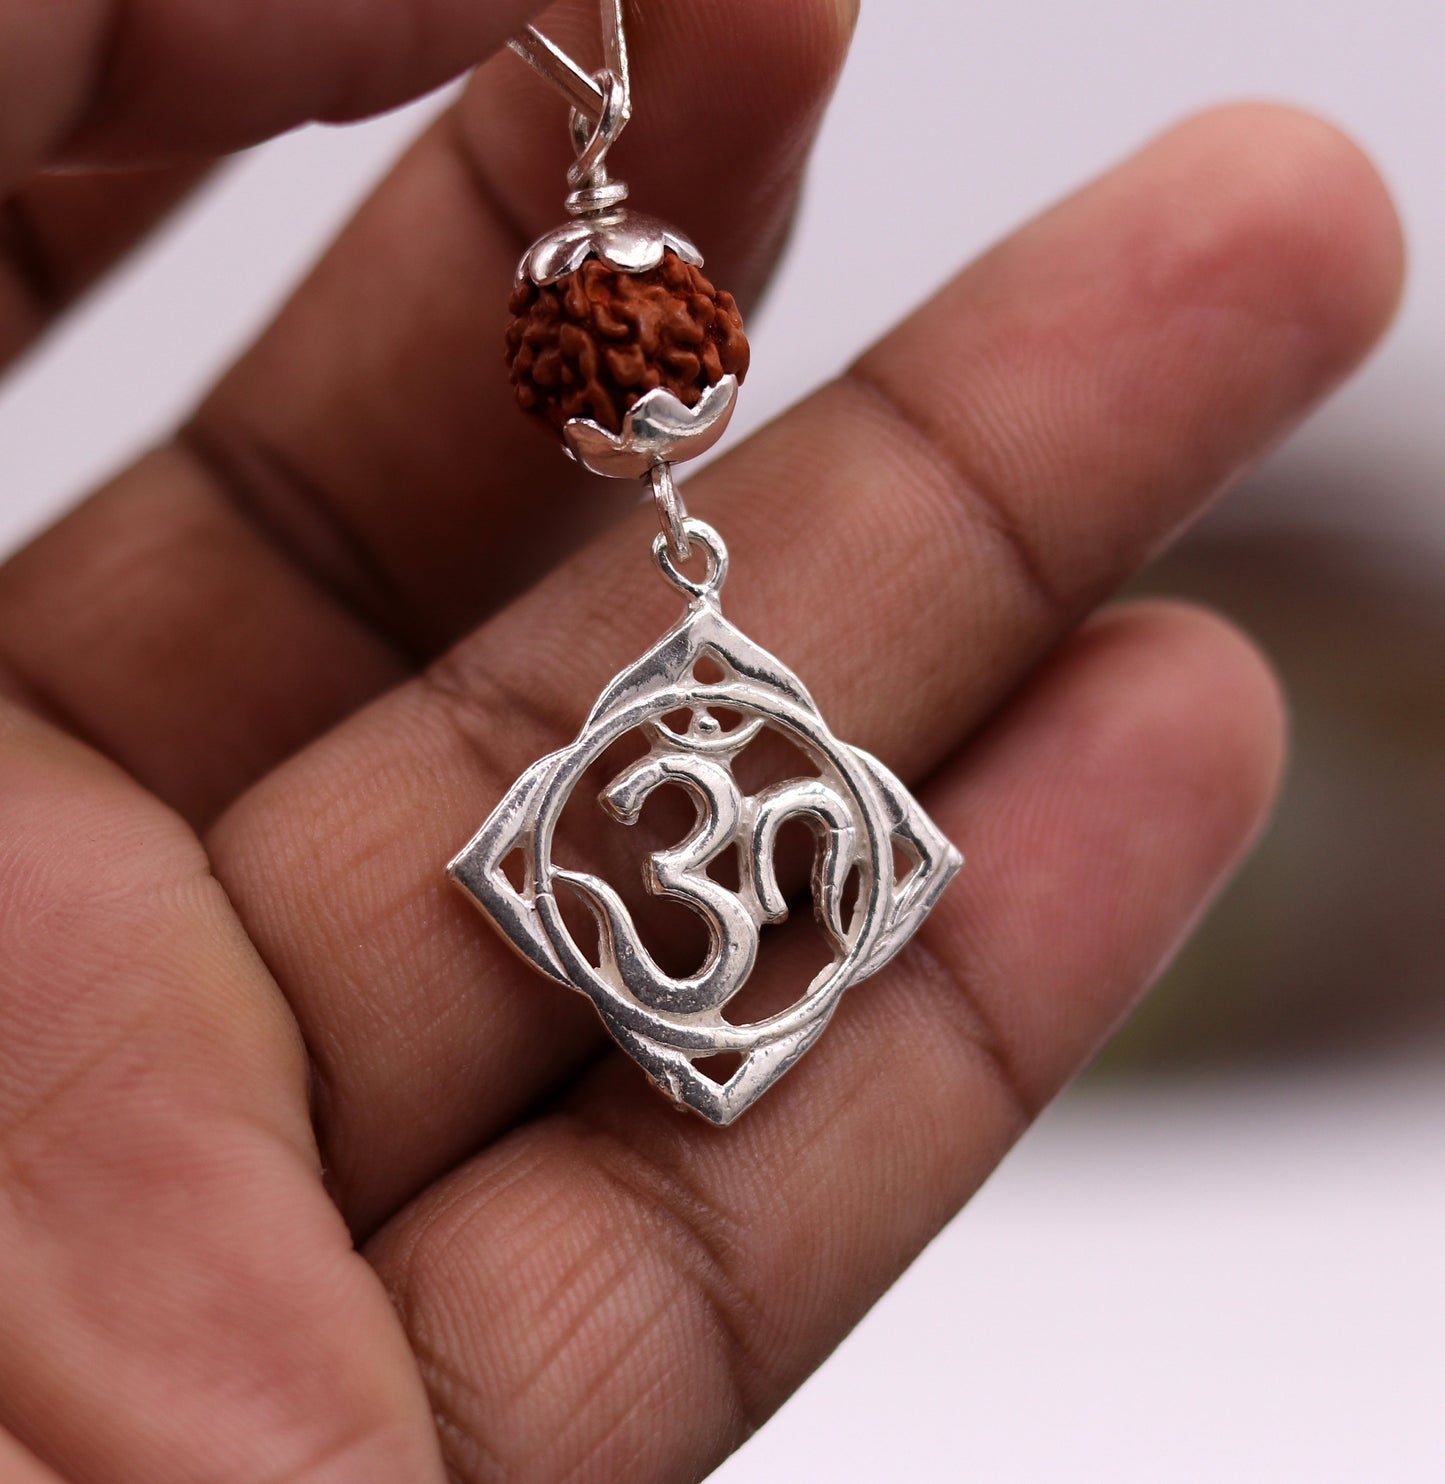 Vintage antique design solid silver handmade aum pendant with natural rudraksh beads pendant jewelry nsp91 - TRIBAL ORNAMENTS